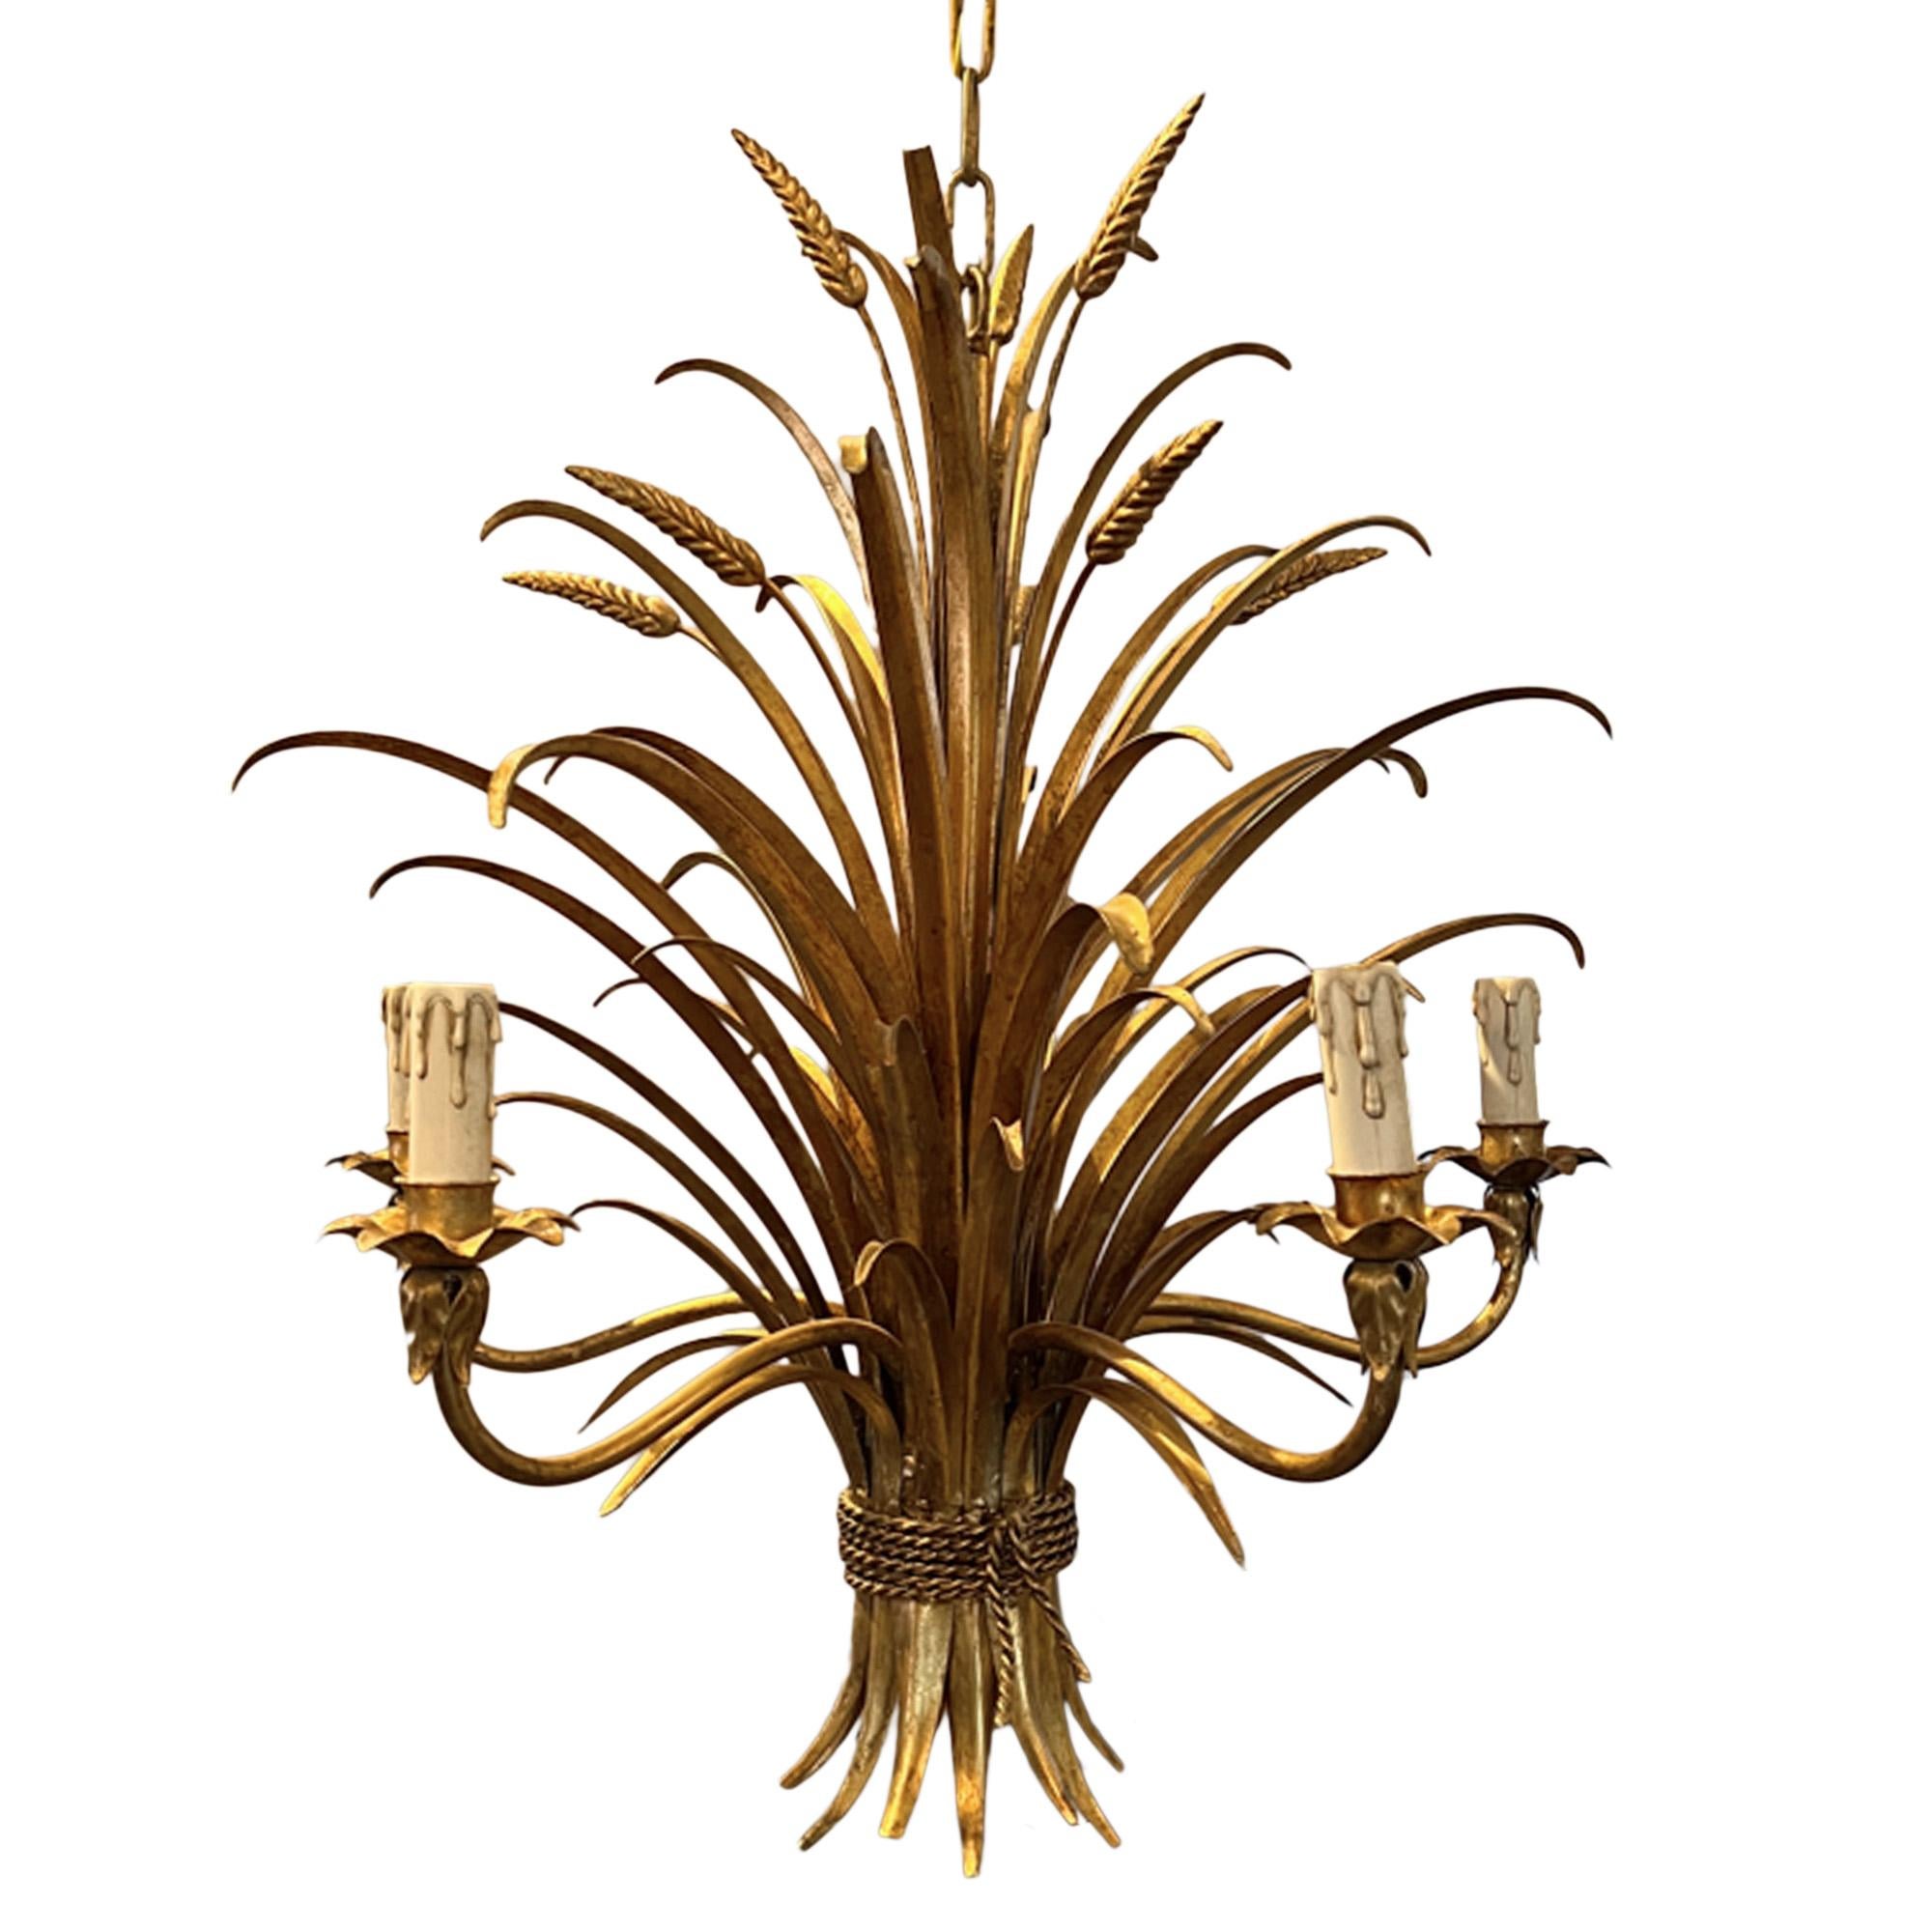 This small wheatsheaf chandelier was made in Italy in the 1970s. It has five arms, crafted from gilt metal, the leaves, ears of corn and rope tie are so detailed. Please see close up pictures.

Photographed with 'drip' candles - can be replaced